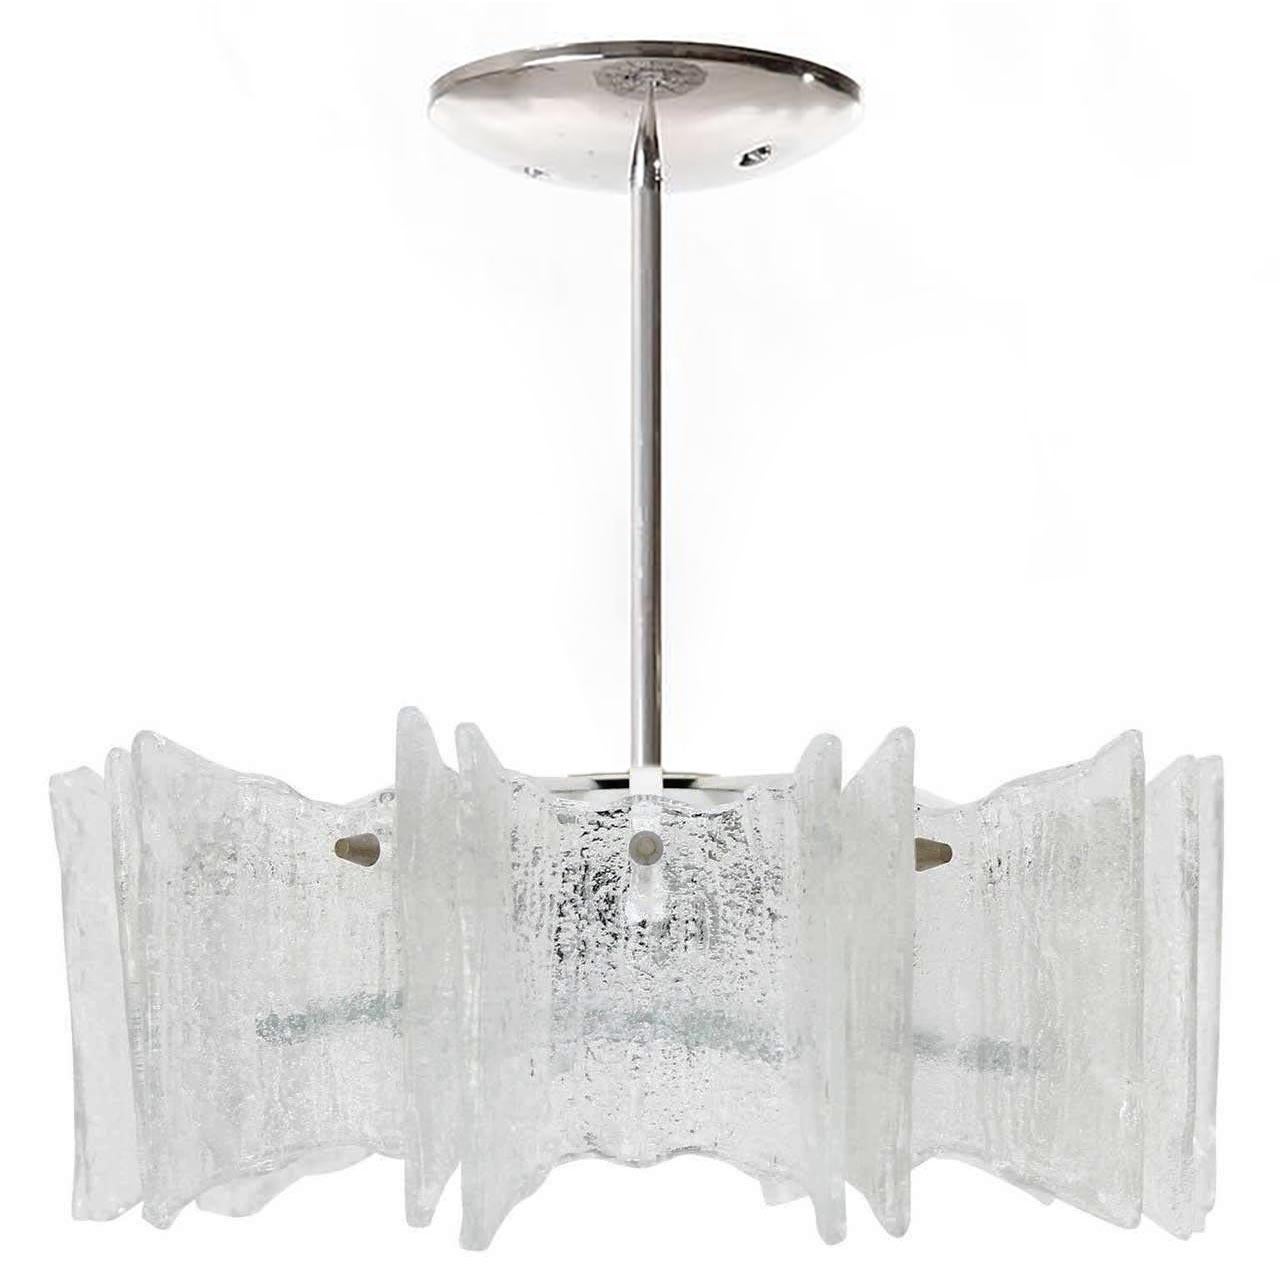 A beautiful star-shaped light fixture by Kalmar Vienna, Austria, manufactured in midcentury in 1960s.
It is made of frosted clear glass, a white lacquered frame, and nickel-plated (chrome) bolts, rod, and canopy.
The height of the body without rod